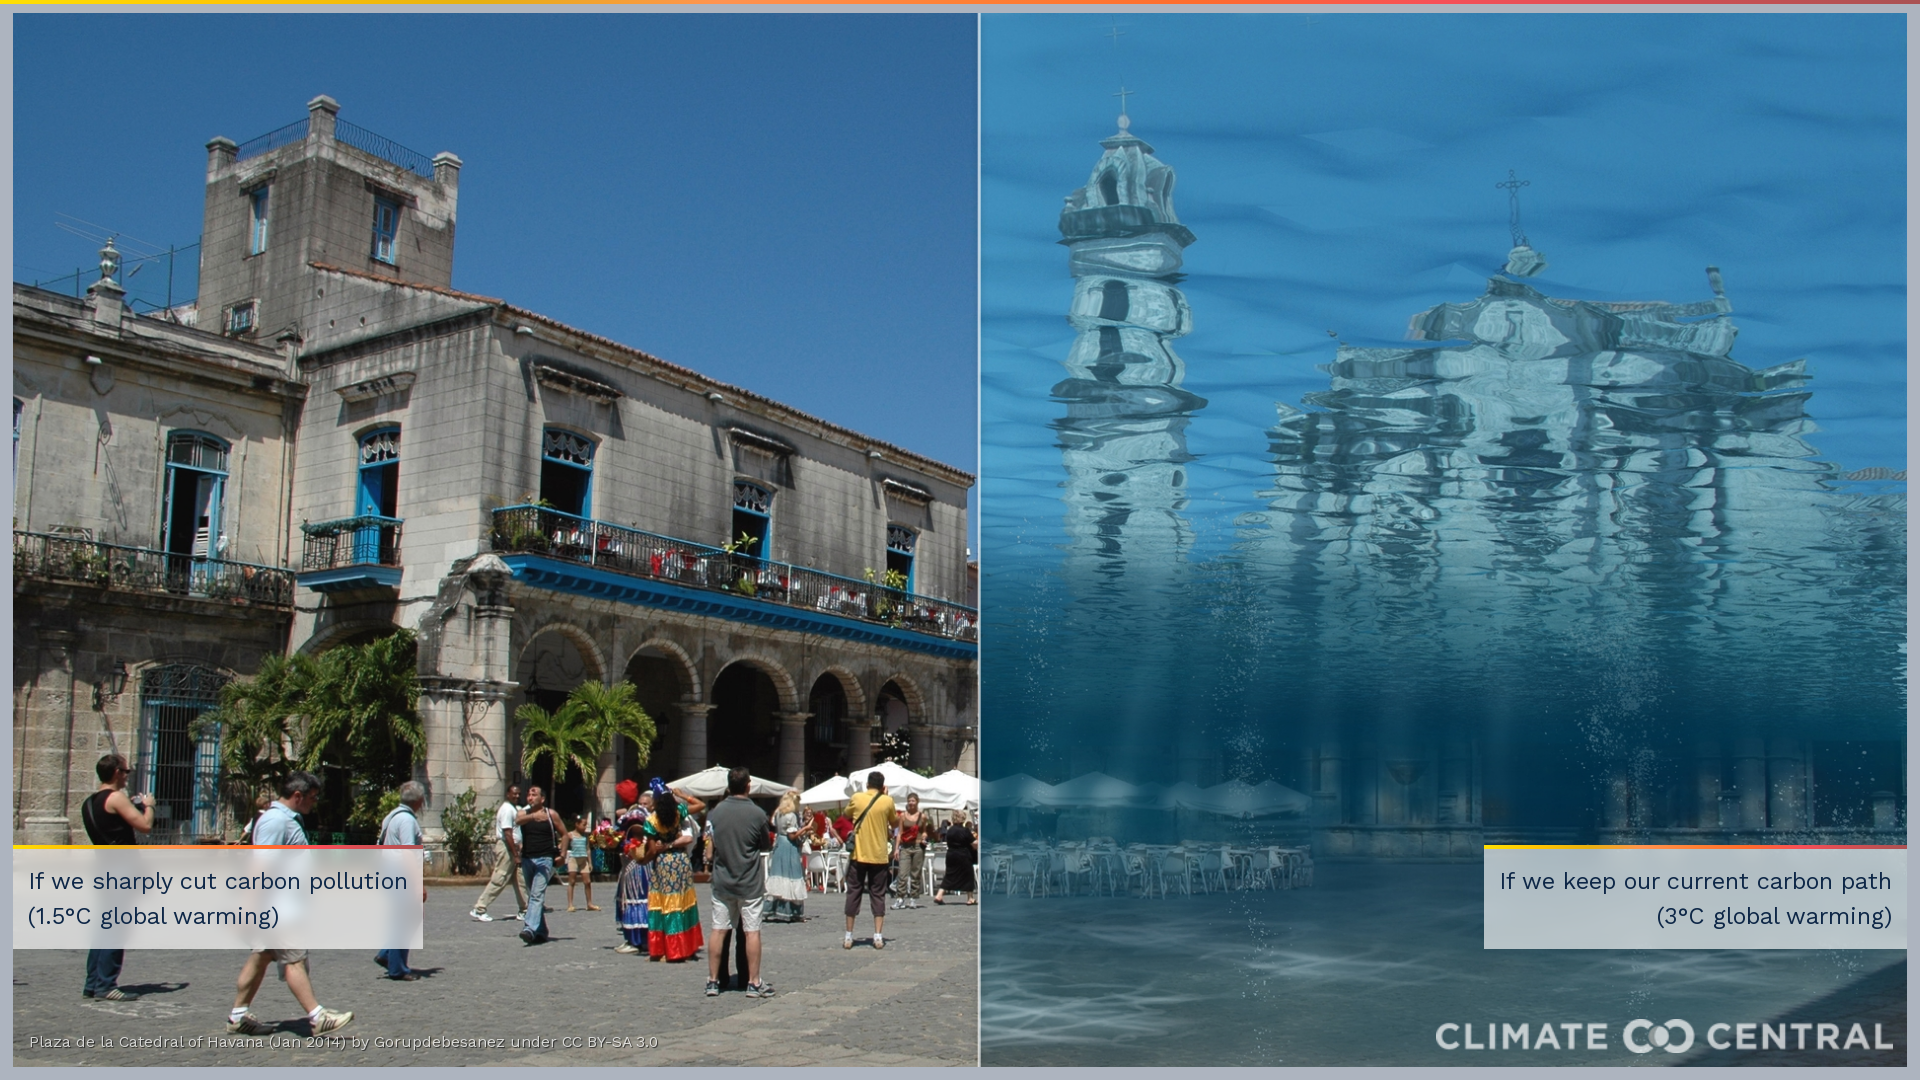 Water levels at the Plaza de la Catedral in Havana, Cuba if global warming hits 1.5C (left) or 3C (right).